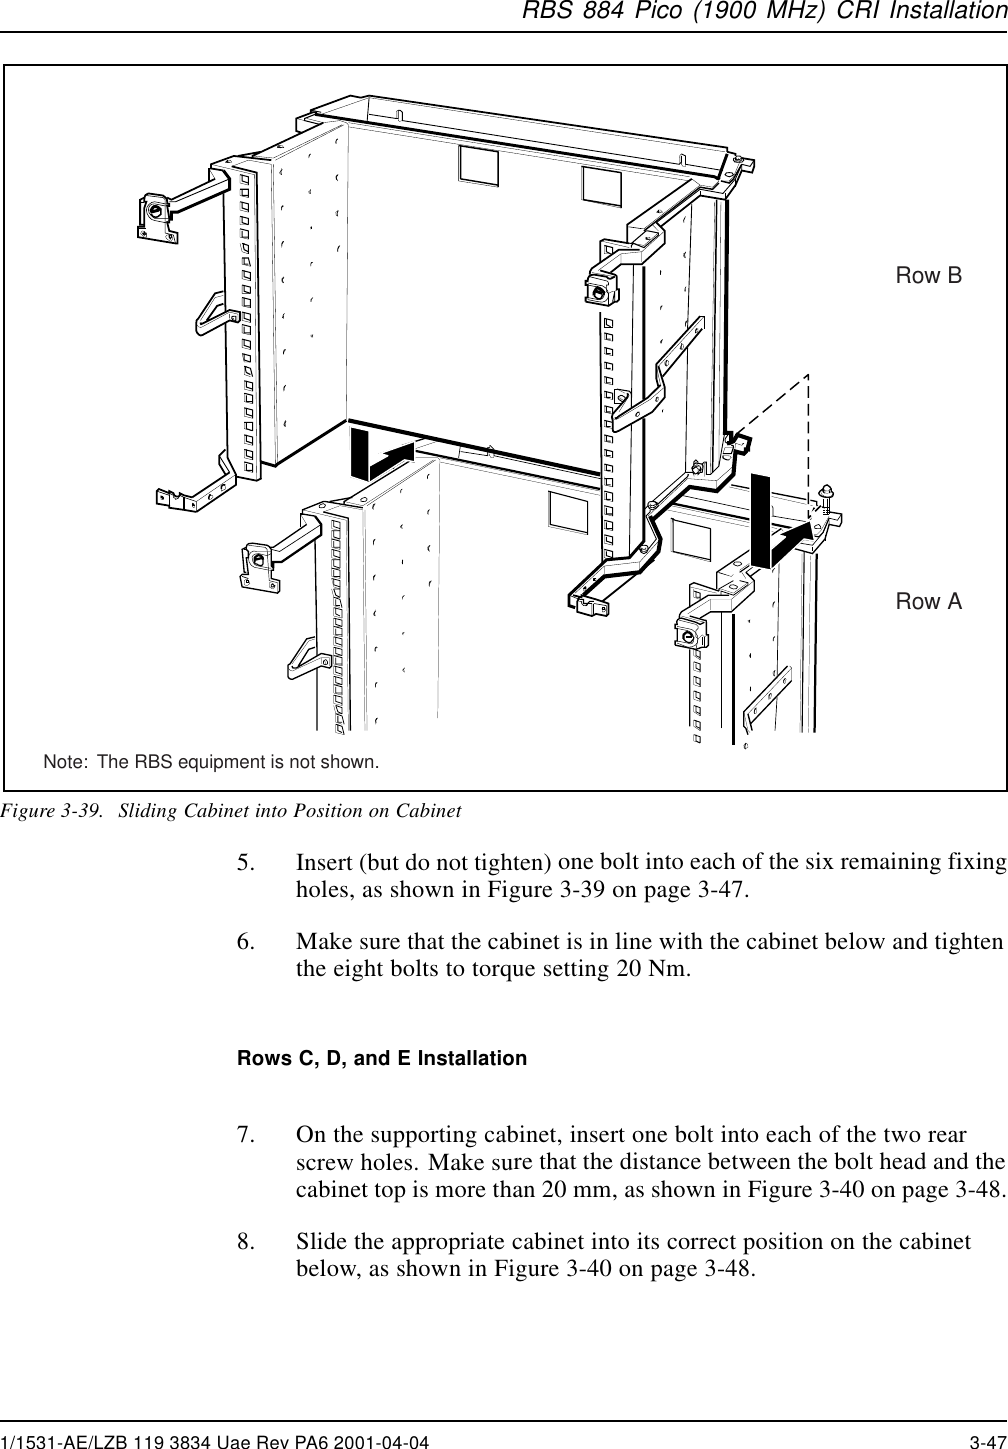 RBS 884 Pico (1900 MHz) CRI InstallationRow BRow ANote:  The RBS equipment is not shown.Figure 3-39. Sliding Cabinet into Position on Cabinet5. Insert (but do not tighten) one bolt into each of the six remaining fixingholes, as shown in Figure 3-39 on page 3-47.6. Make sure that the cabinet is in line with the cabinet below and tightenthe eight bolts to torque setting 20 Nm.Rows C, D, and E Installation7. On the supporting cabinet, insert one bolt into each of the two rearscrew holes. Make sure that the distance between the bolt head and thecabinet top is more than 20 mm, as shown in Figure 3-40 on page 3-48.8. Slide the appropriate cabinet into its correct position on the cabinetbelow, as shown in Figure 3-40 on page 3-48.1/1531-AE/LZB 119 3834 Uae Rev PA6 2001-04-04 3-47